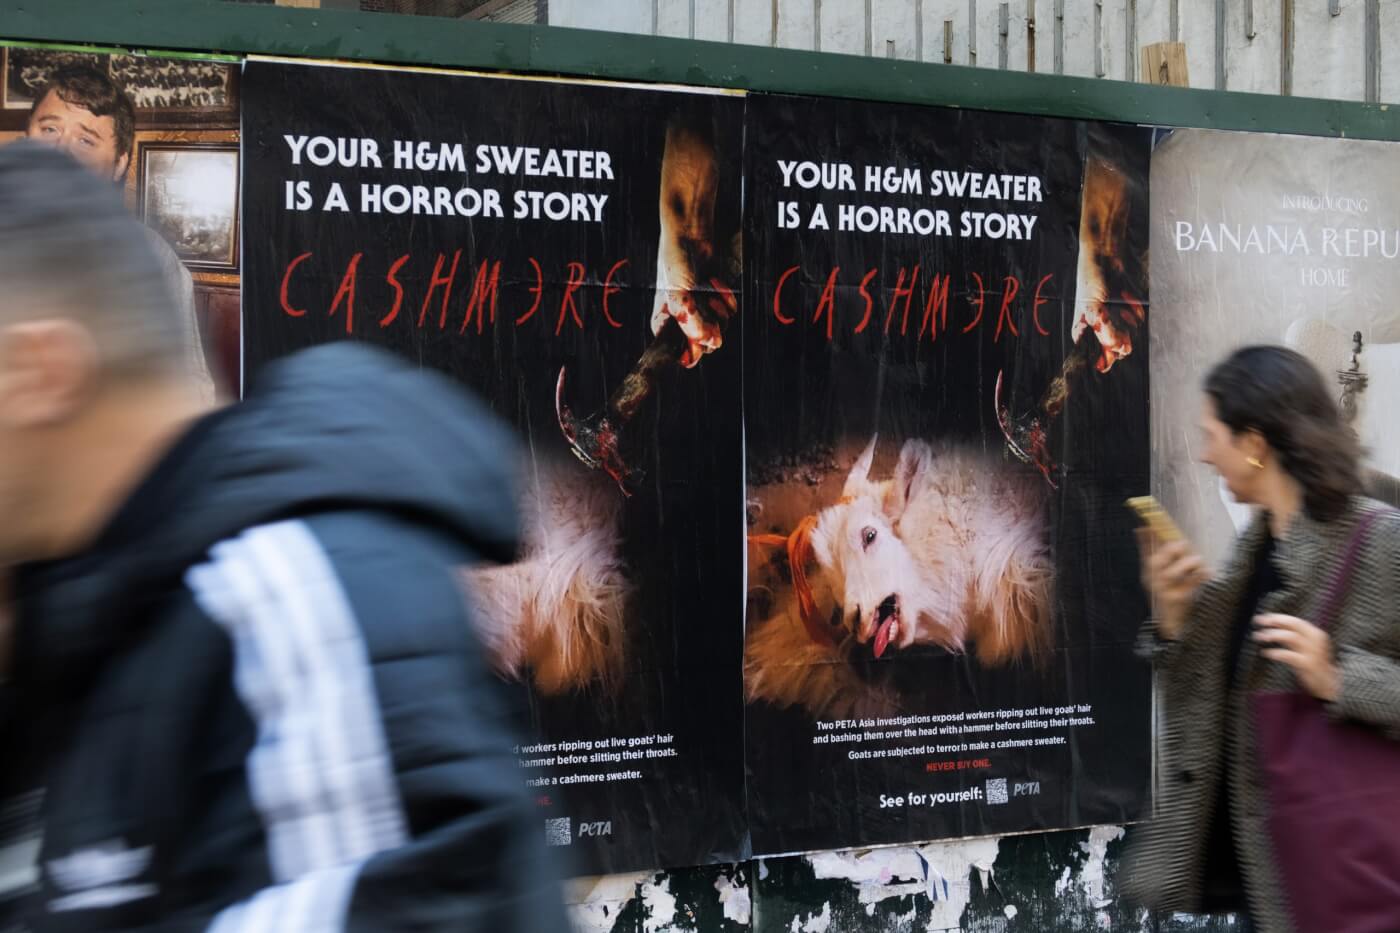 a NYC passerby observing PETA's ad showing how H&M cashmere sweaters are a horror story